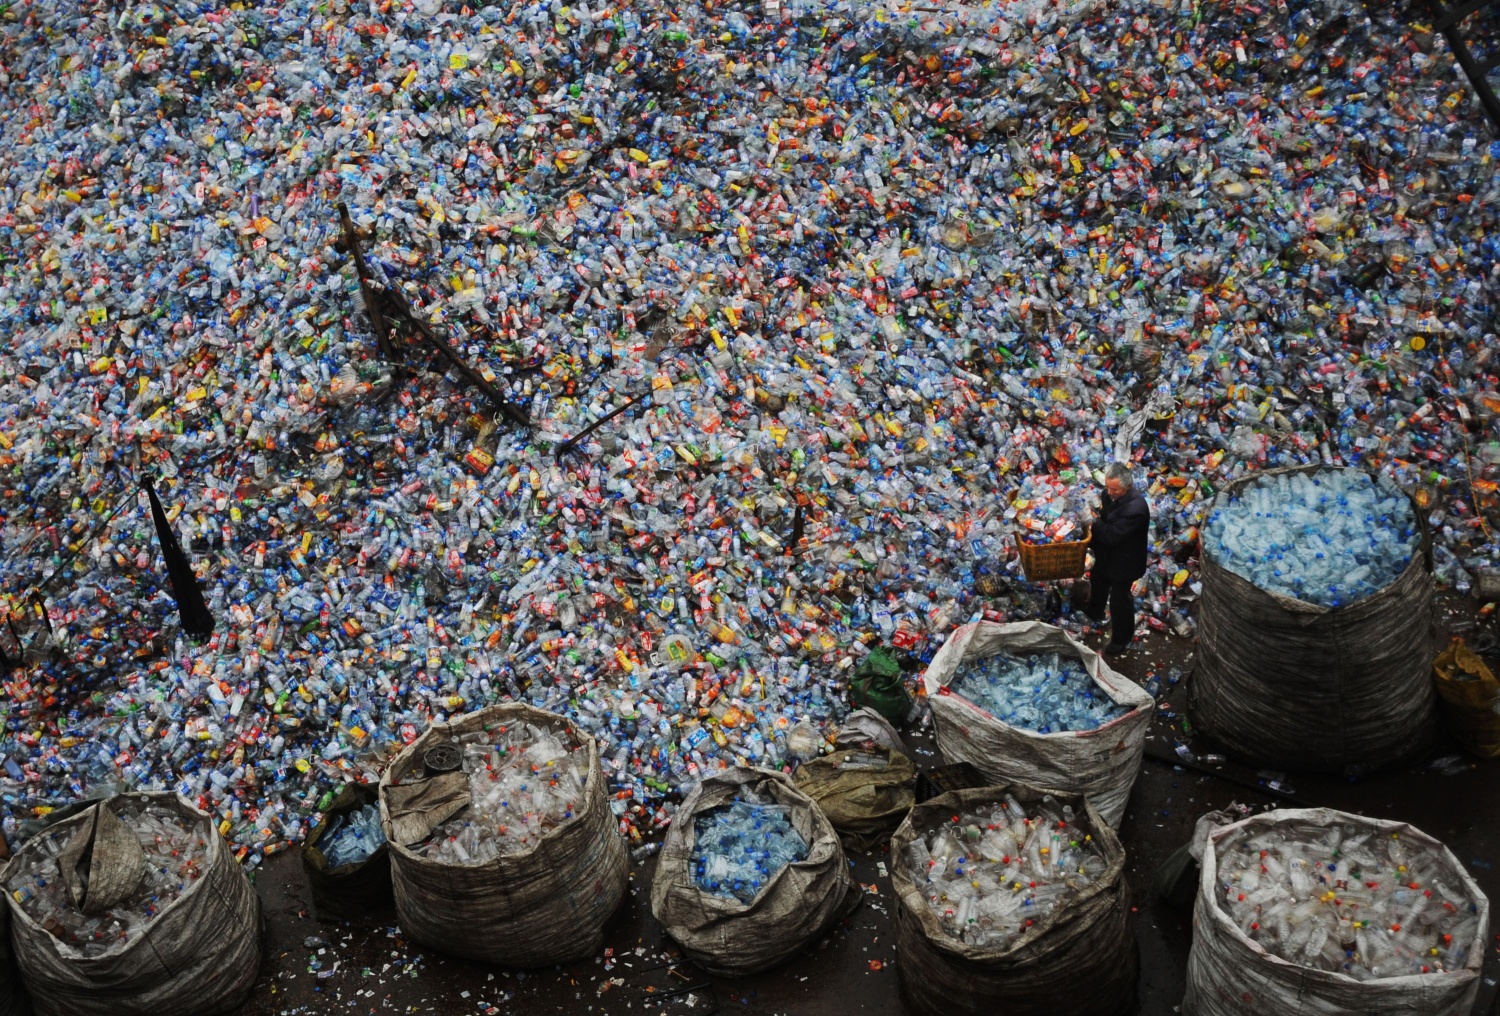 Plastic-Eating 'Super-Enzymes' Reuses Plastic to Curb Pollution 